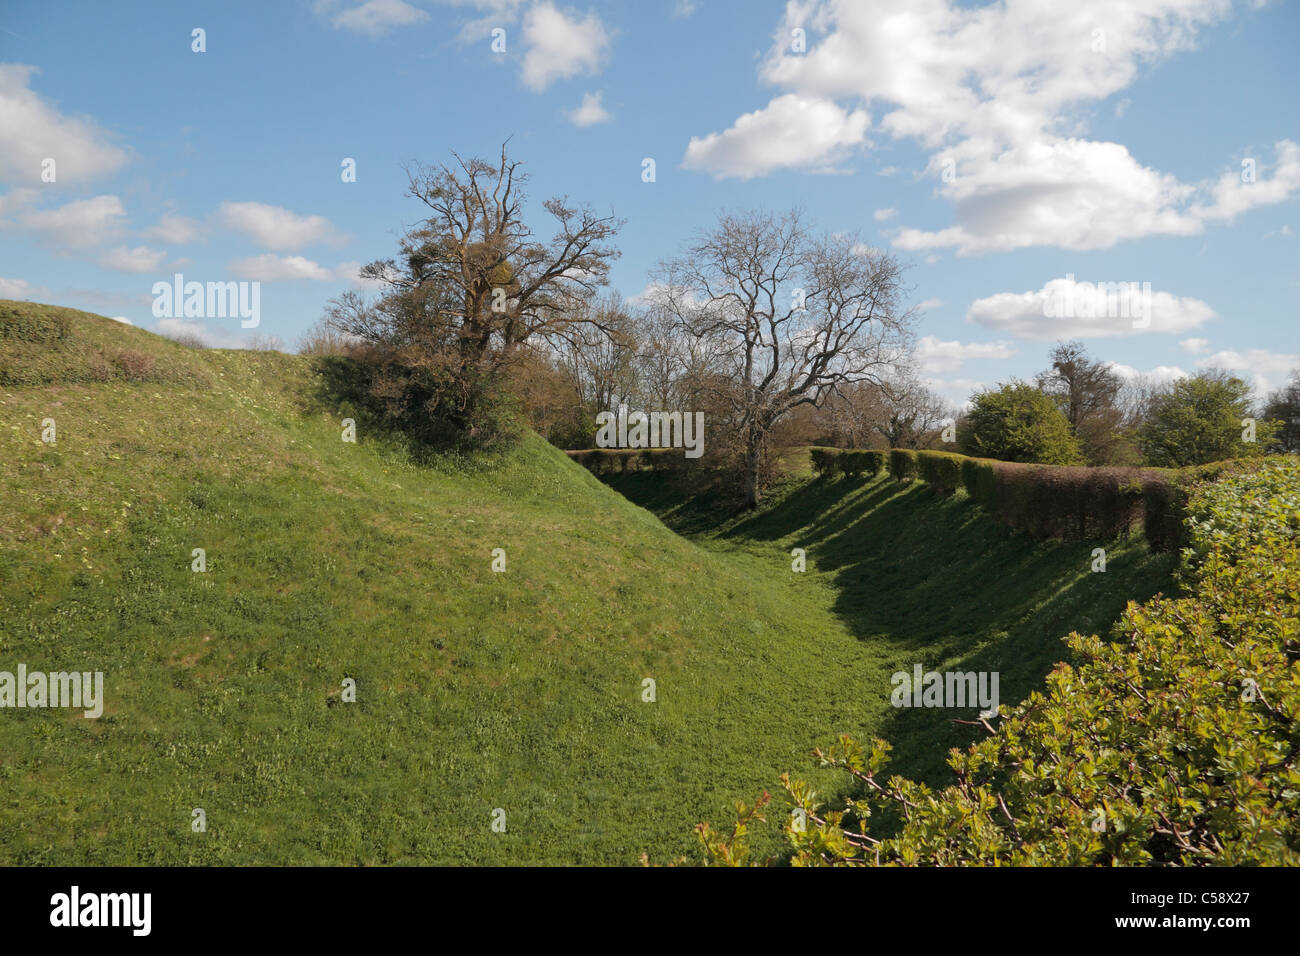 Excellent view of the civil war defensive earthworks around the site of Basing House, Old Basing, Hampshire, UK. Stock Photo